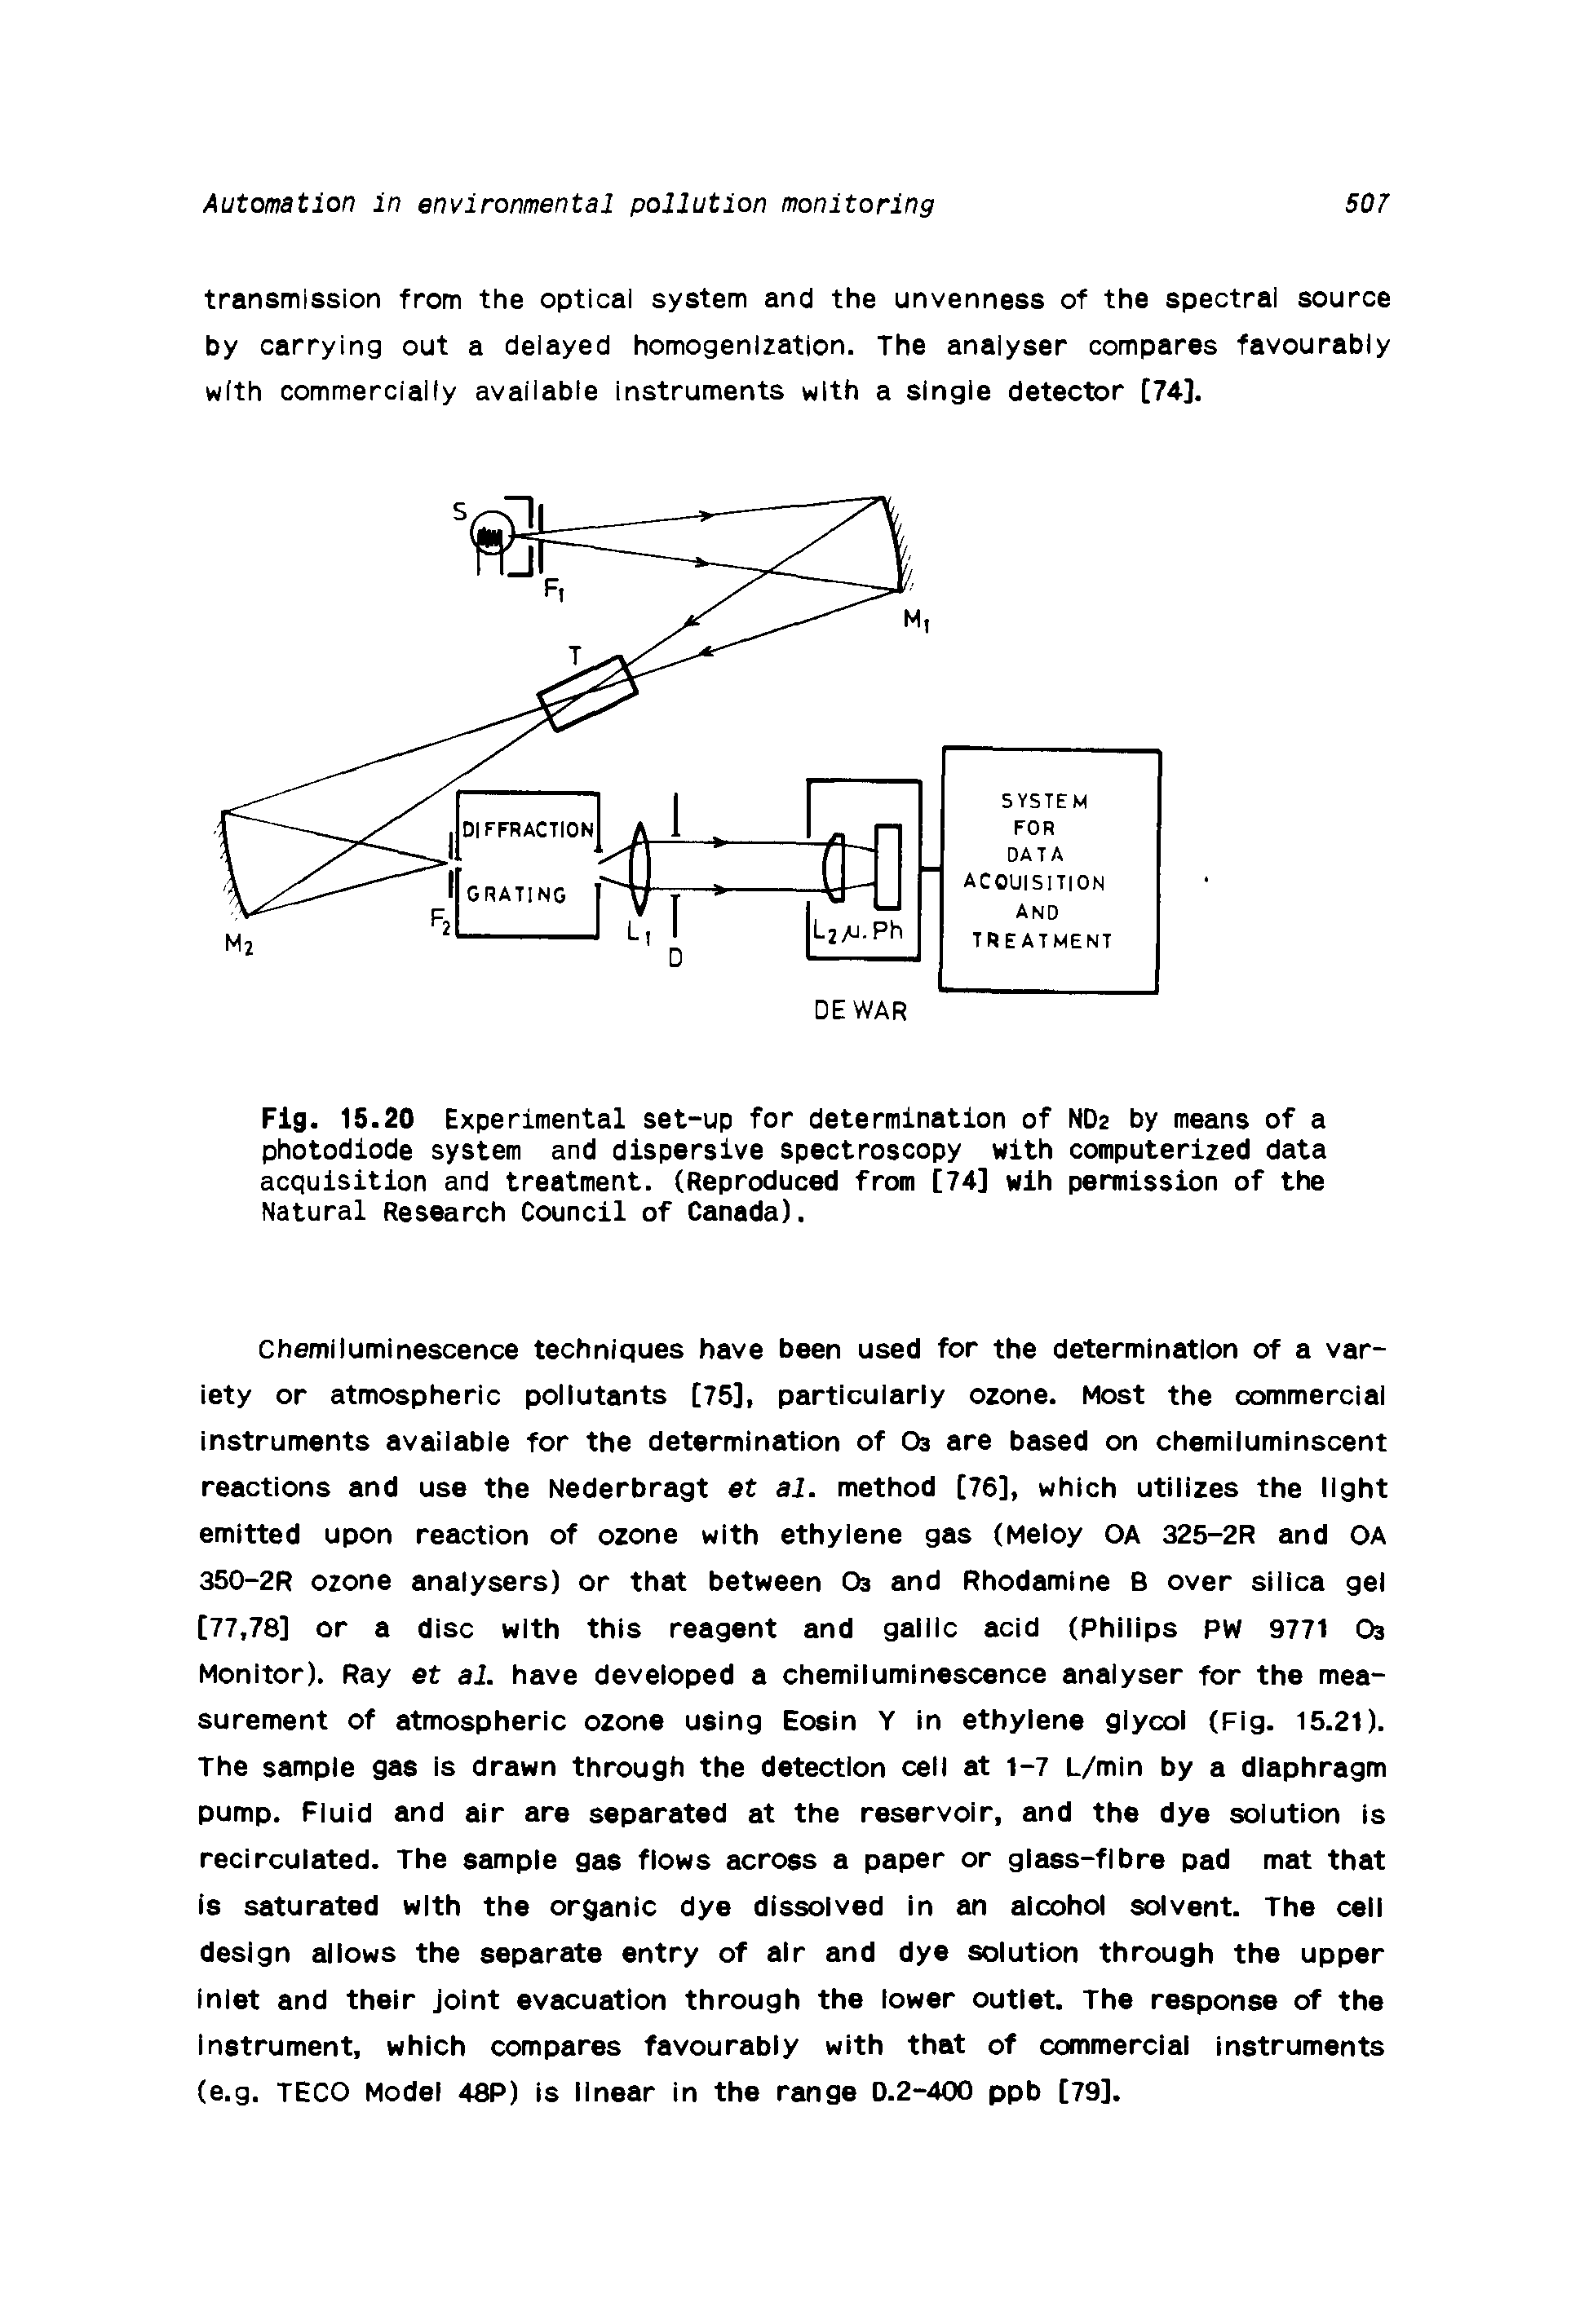 Fig. 15.20 Experimental set-up for determination of ND2 by means of a photodiode system and dispersive spectroscopy with computerized data acquisition and treatment. (Reproduced from [74] wih permission of the Natural Research Council of Canada).